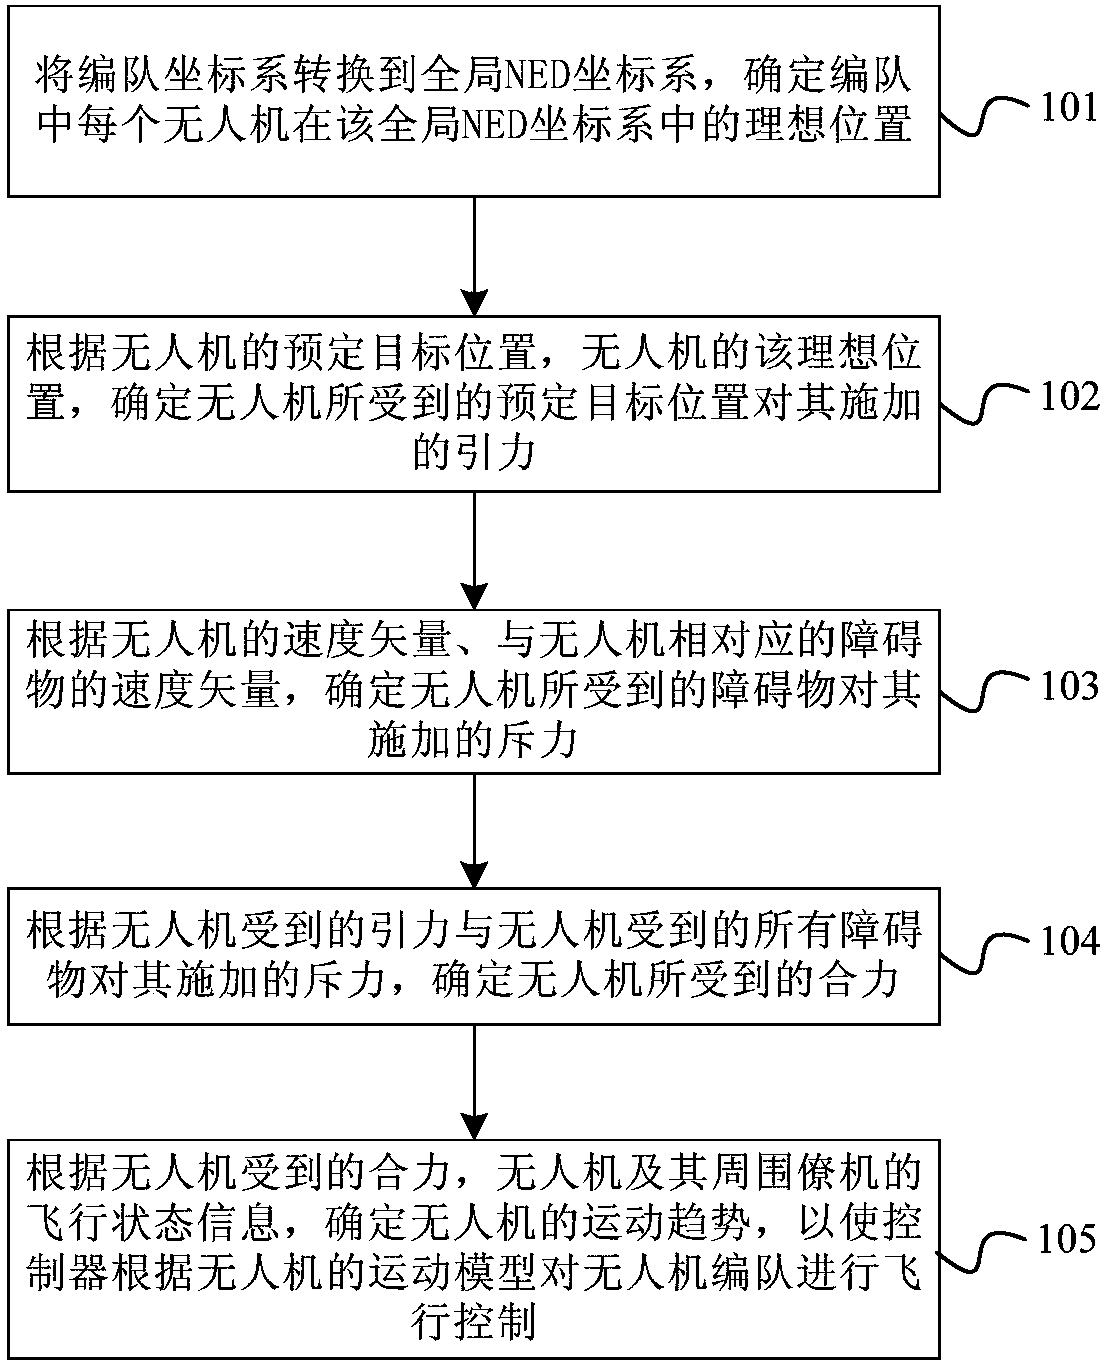 UAV (unmanned aerial vehicle) formation control method and device based on artificial potential field